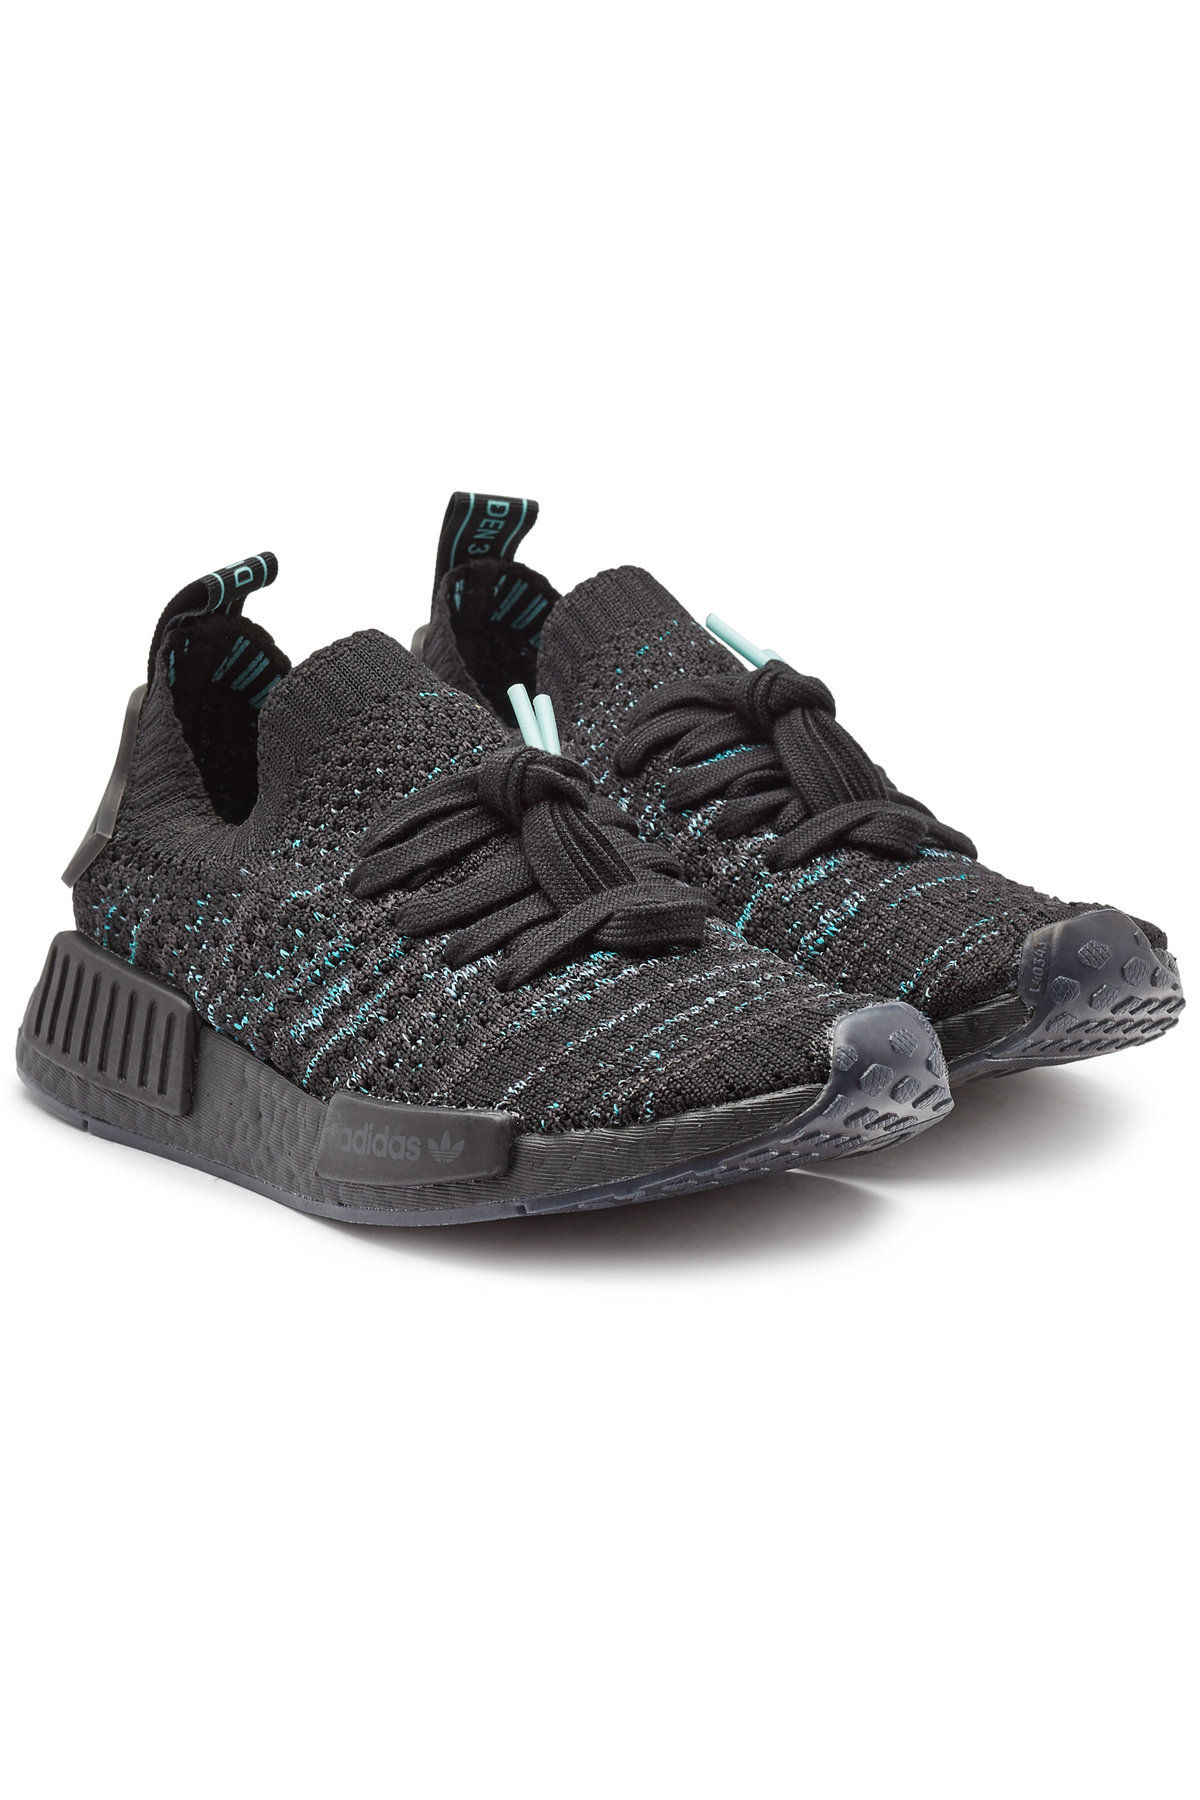 Nmd Stlt Parley Discount, 60% OFF | www.uic-cmba.com